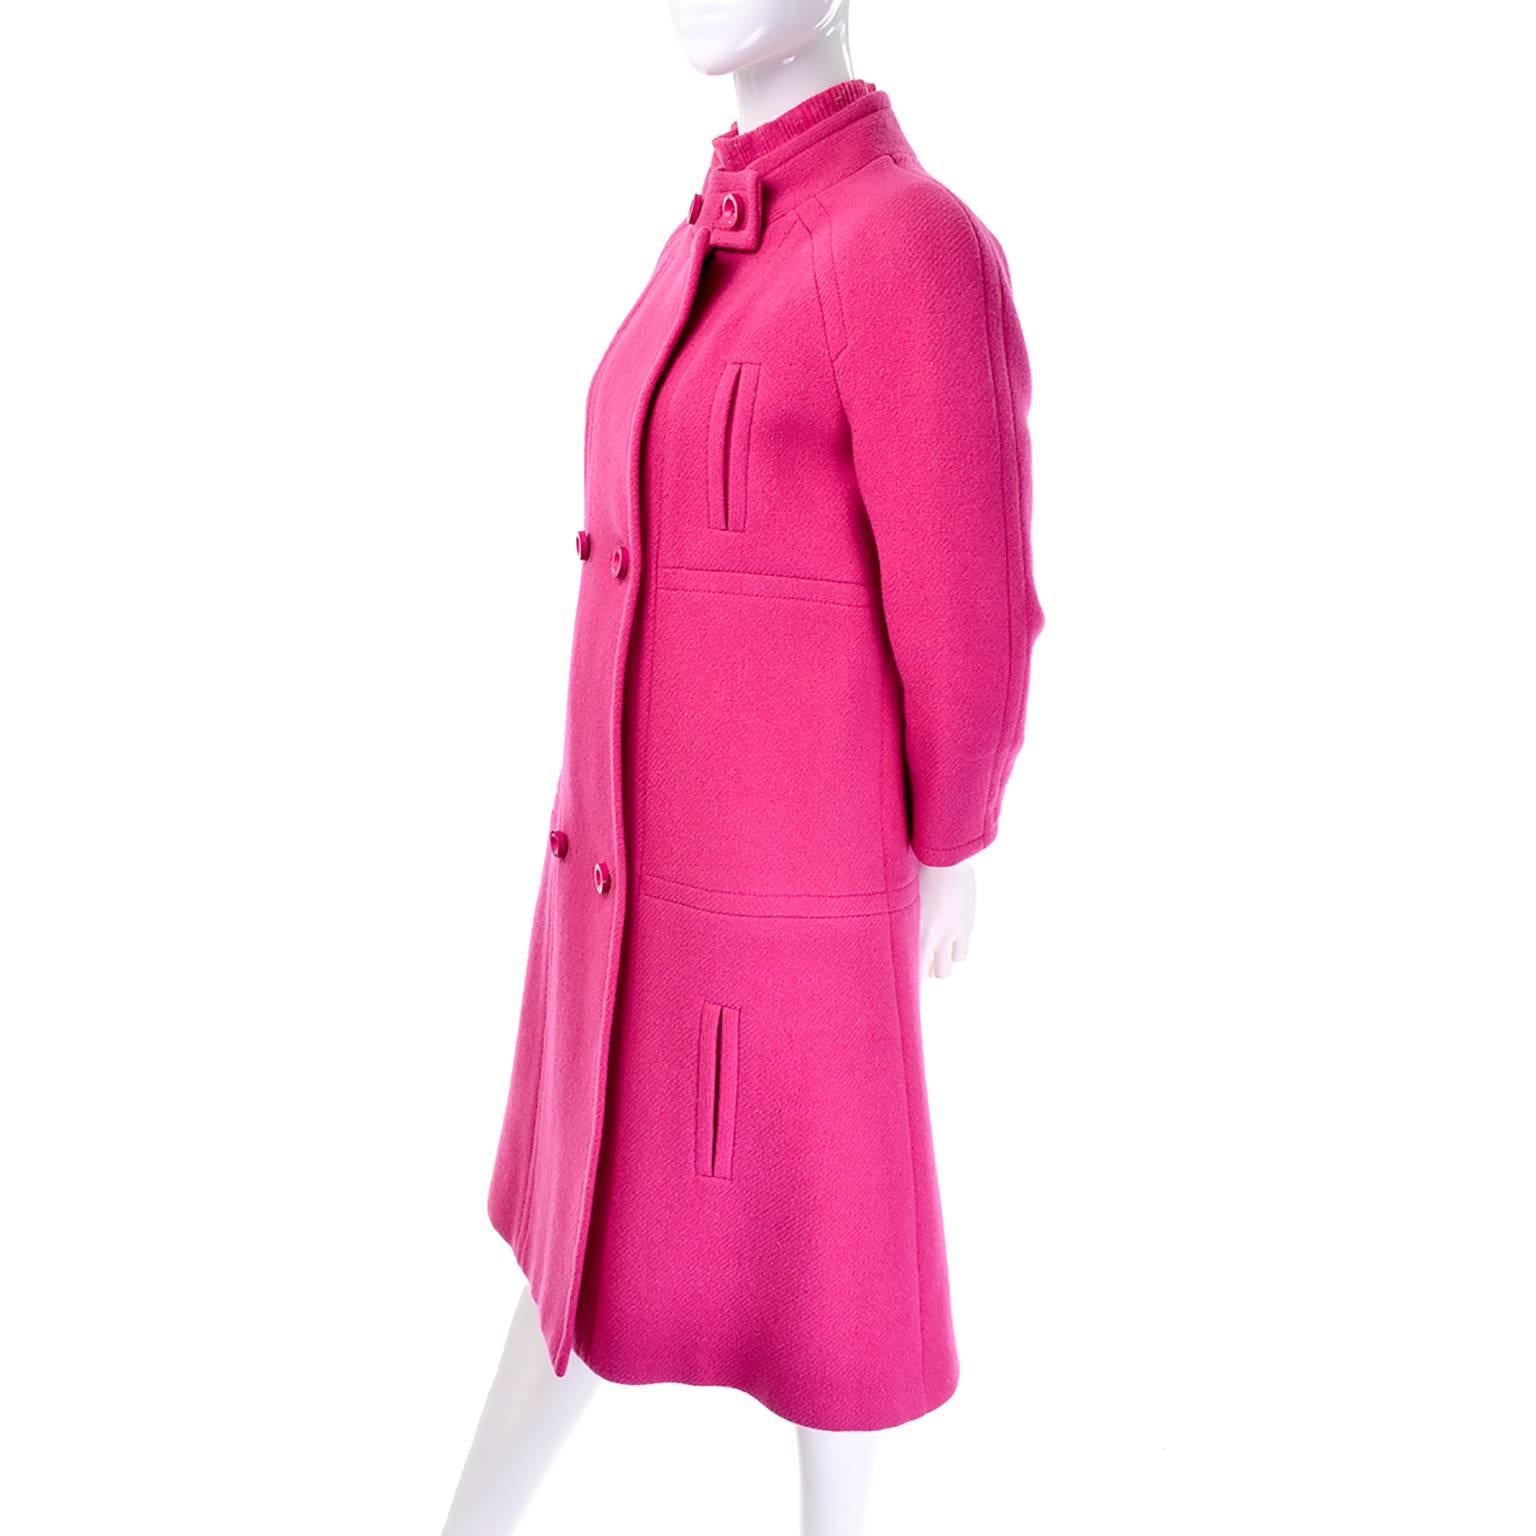 1960s Via Tornabuoni Florence Italy Pink Vintage Coat Suit Skirt Top C Ciani 4